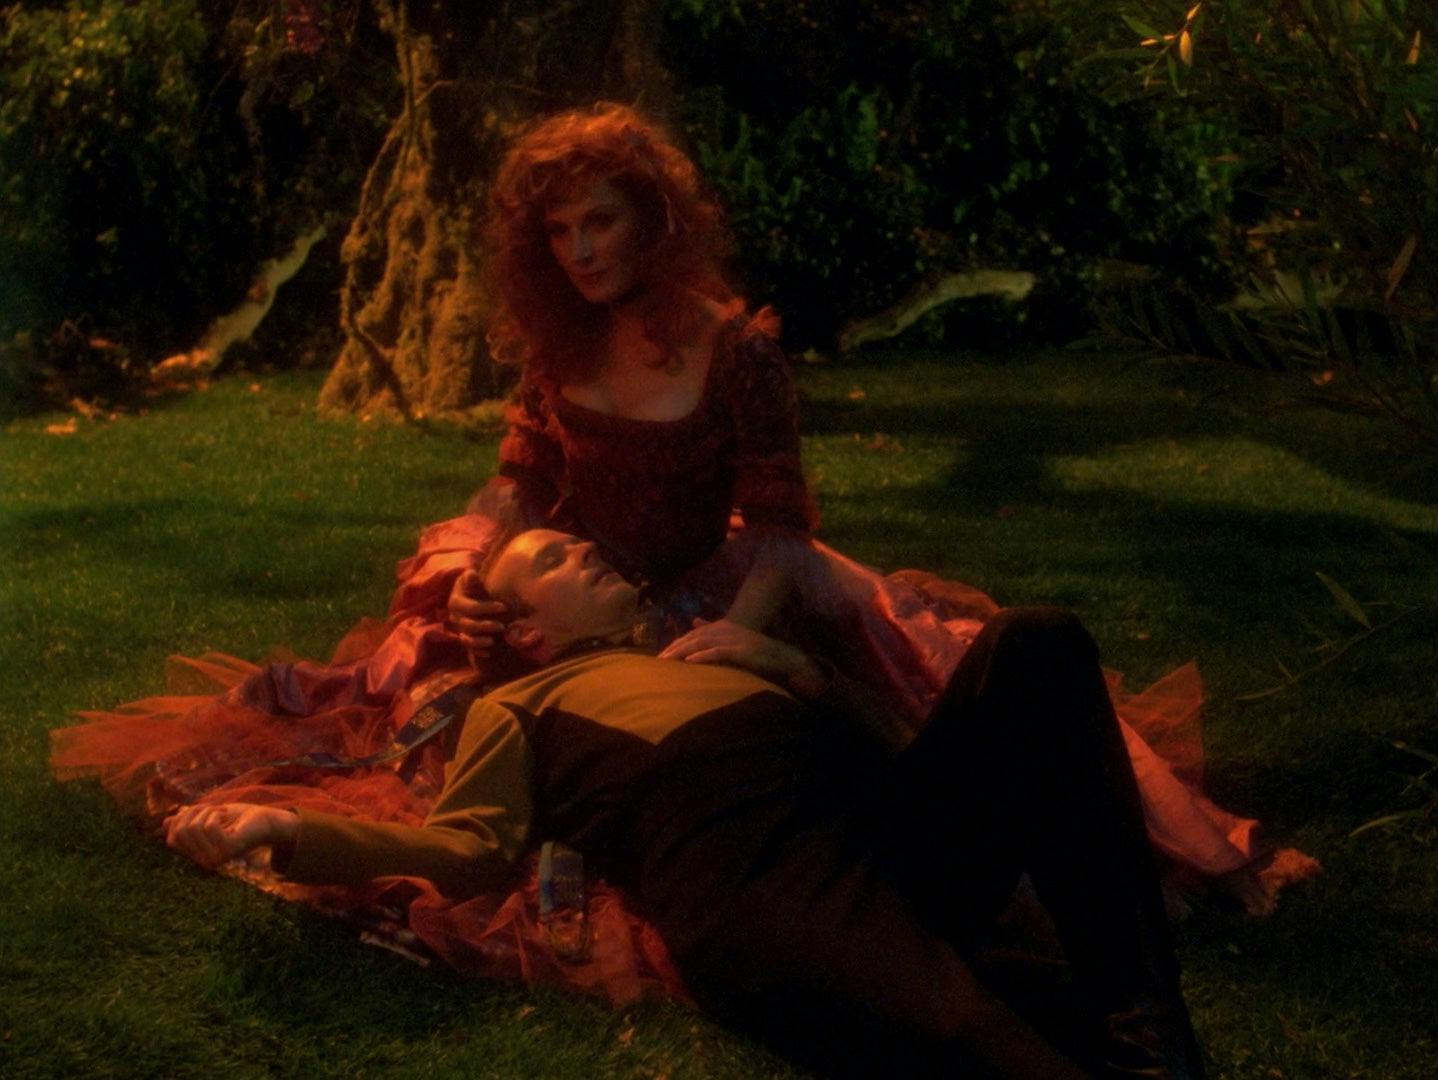 Barclay in his Starfleet uniform lies down in the lap of a simulation Beverly Crusher on the Holodeck